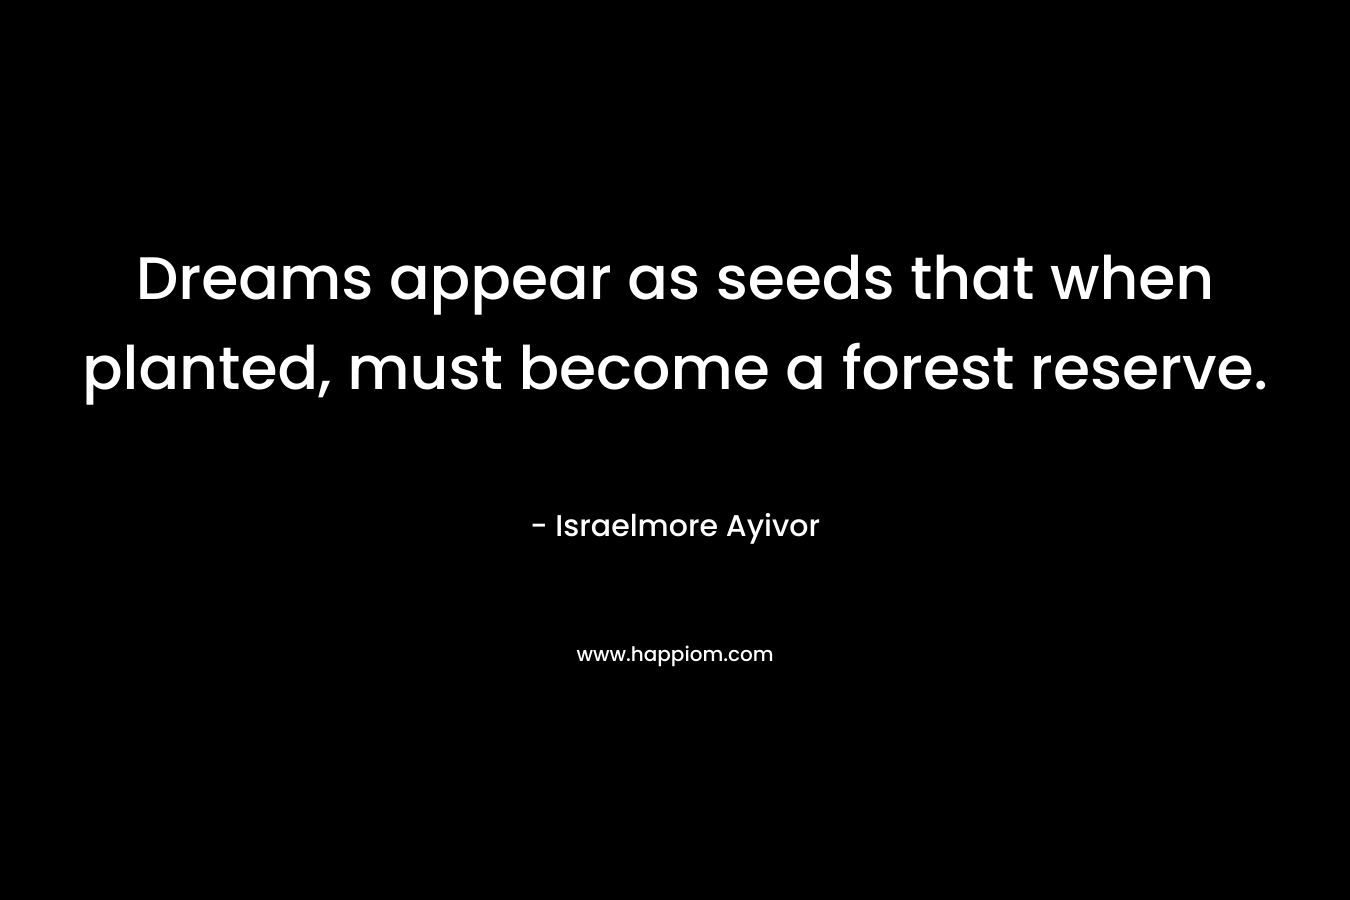 Dreams appear as seeds that when planted, must become a forest reserve. – Israelmore Ayivor